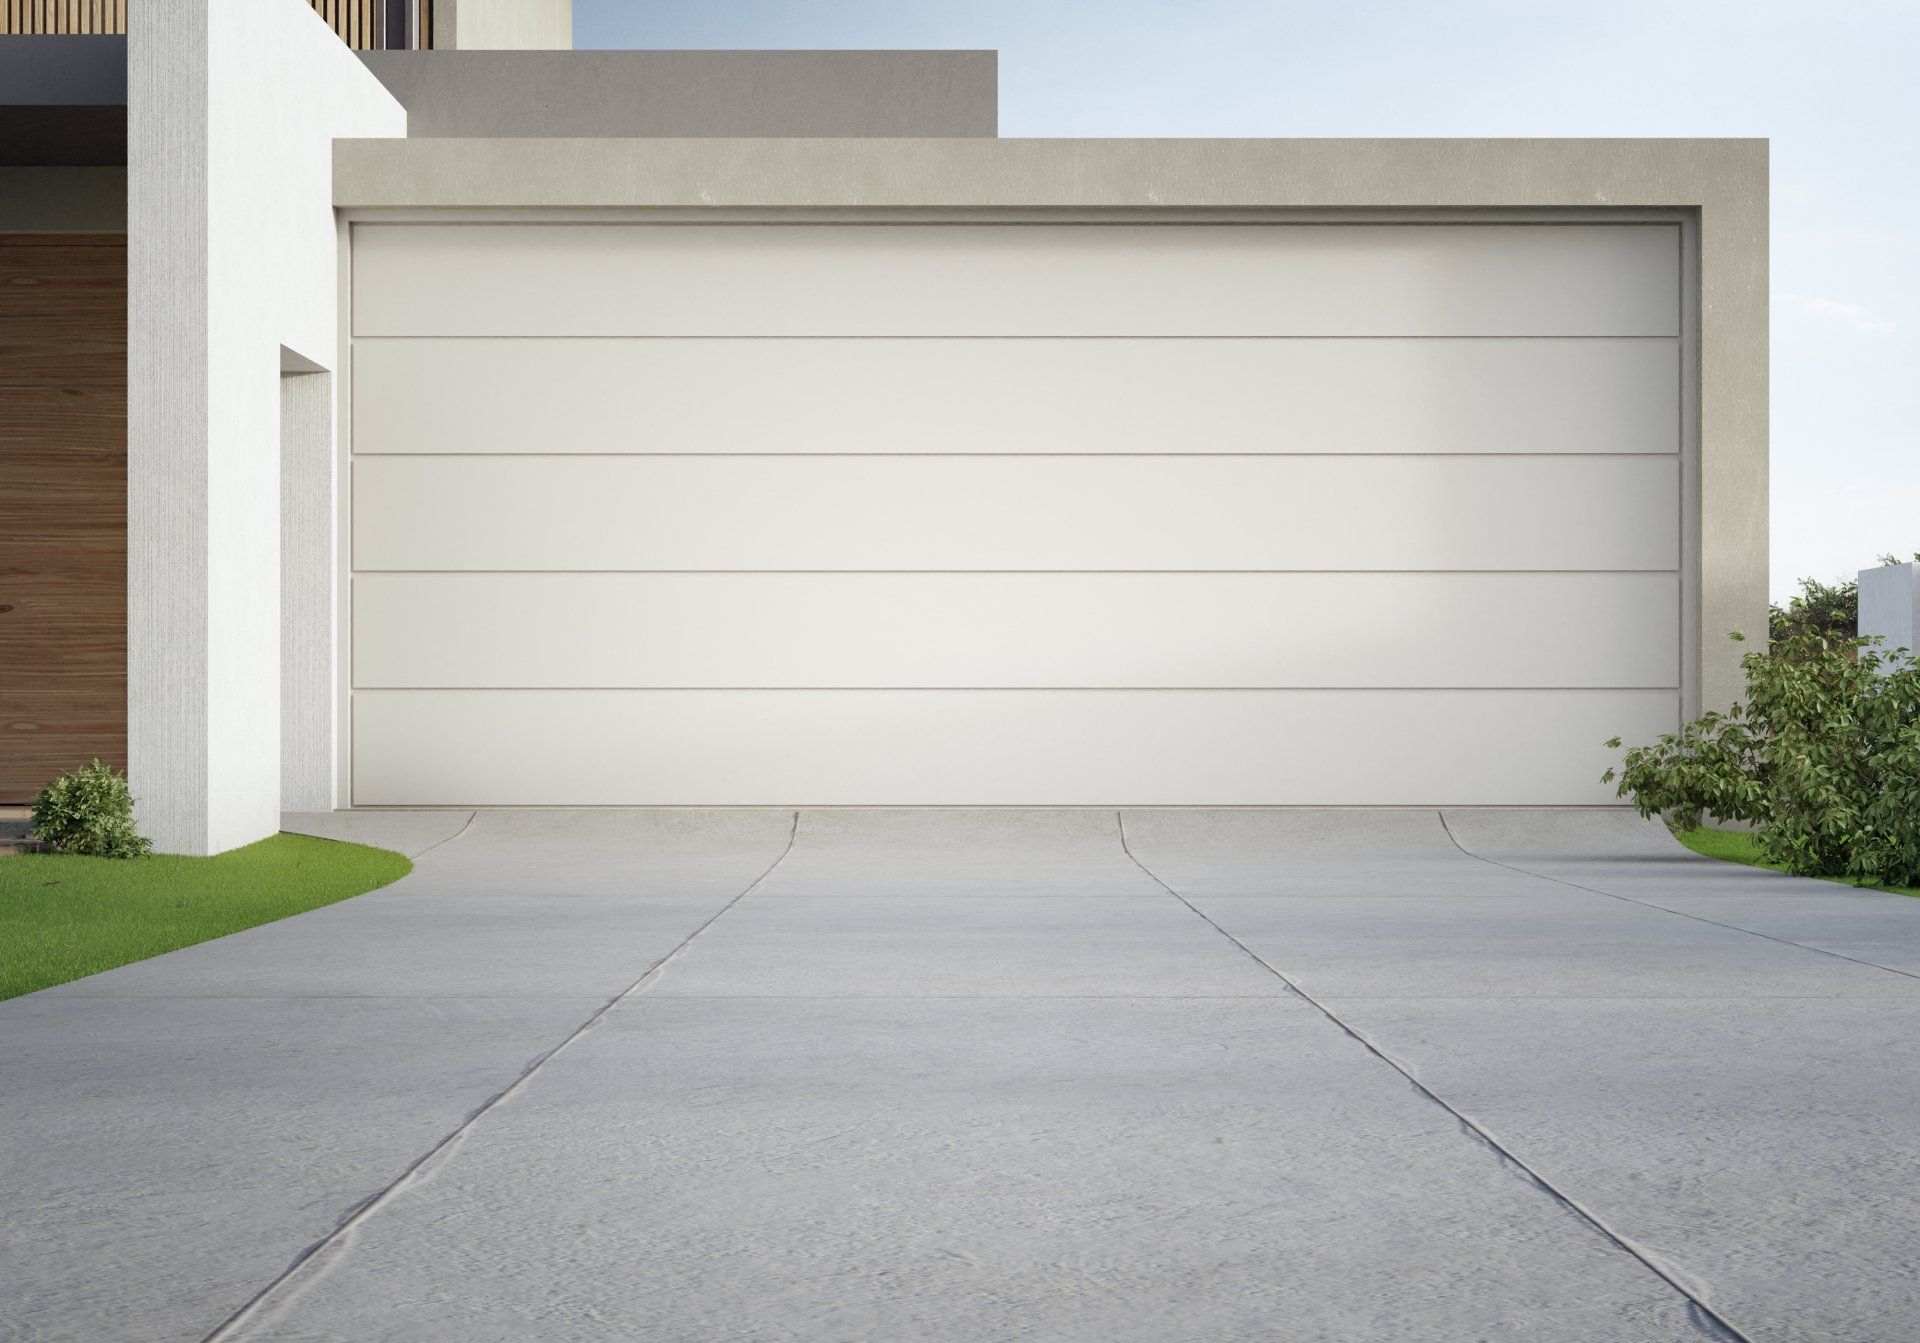 Closeup view of a concrete driveway leading up to a modern-looking white garage door.